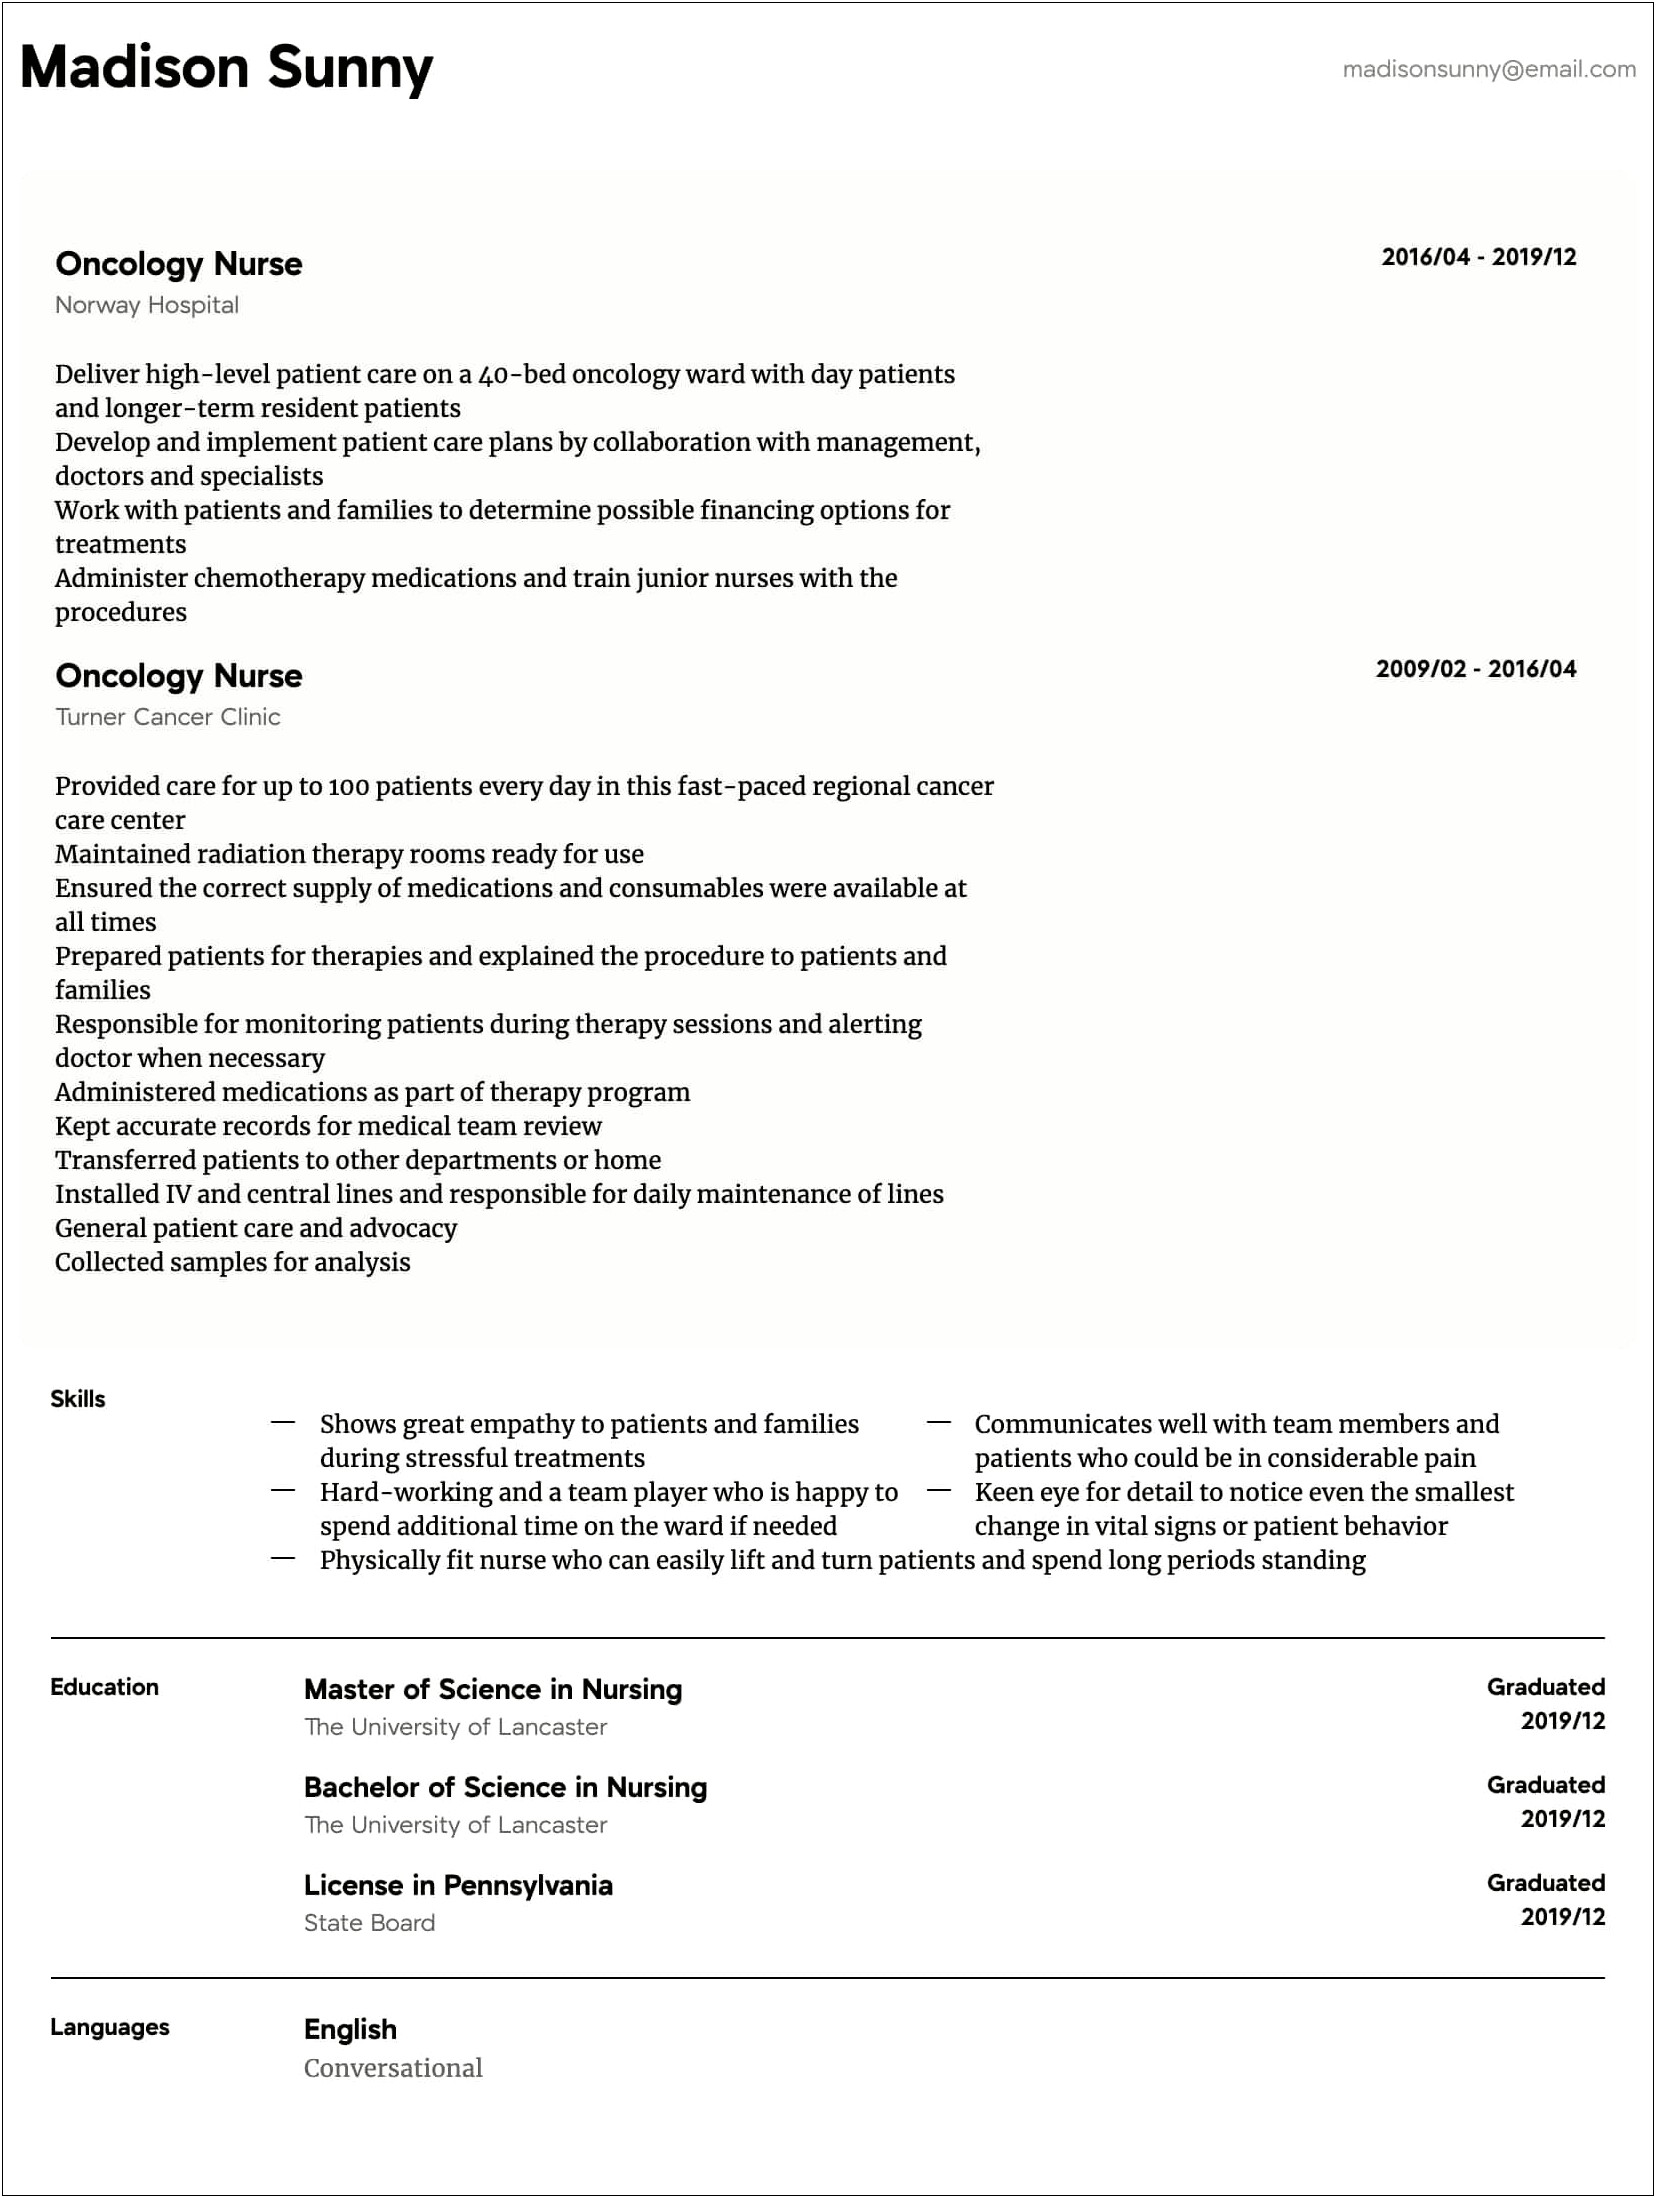 Description Of Office Oncology Np For A Resume